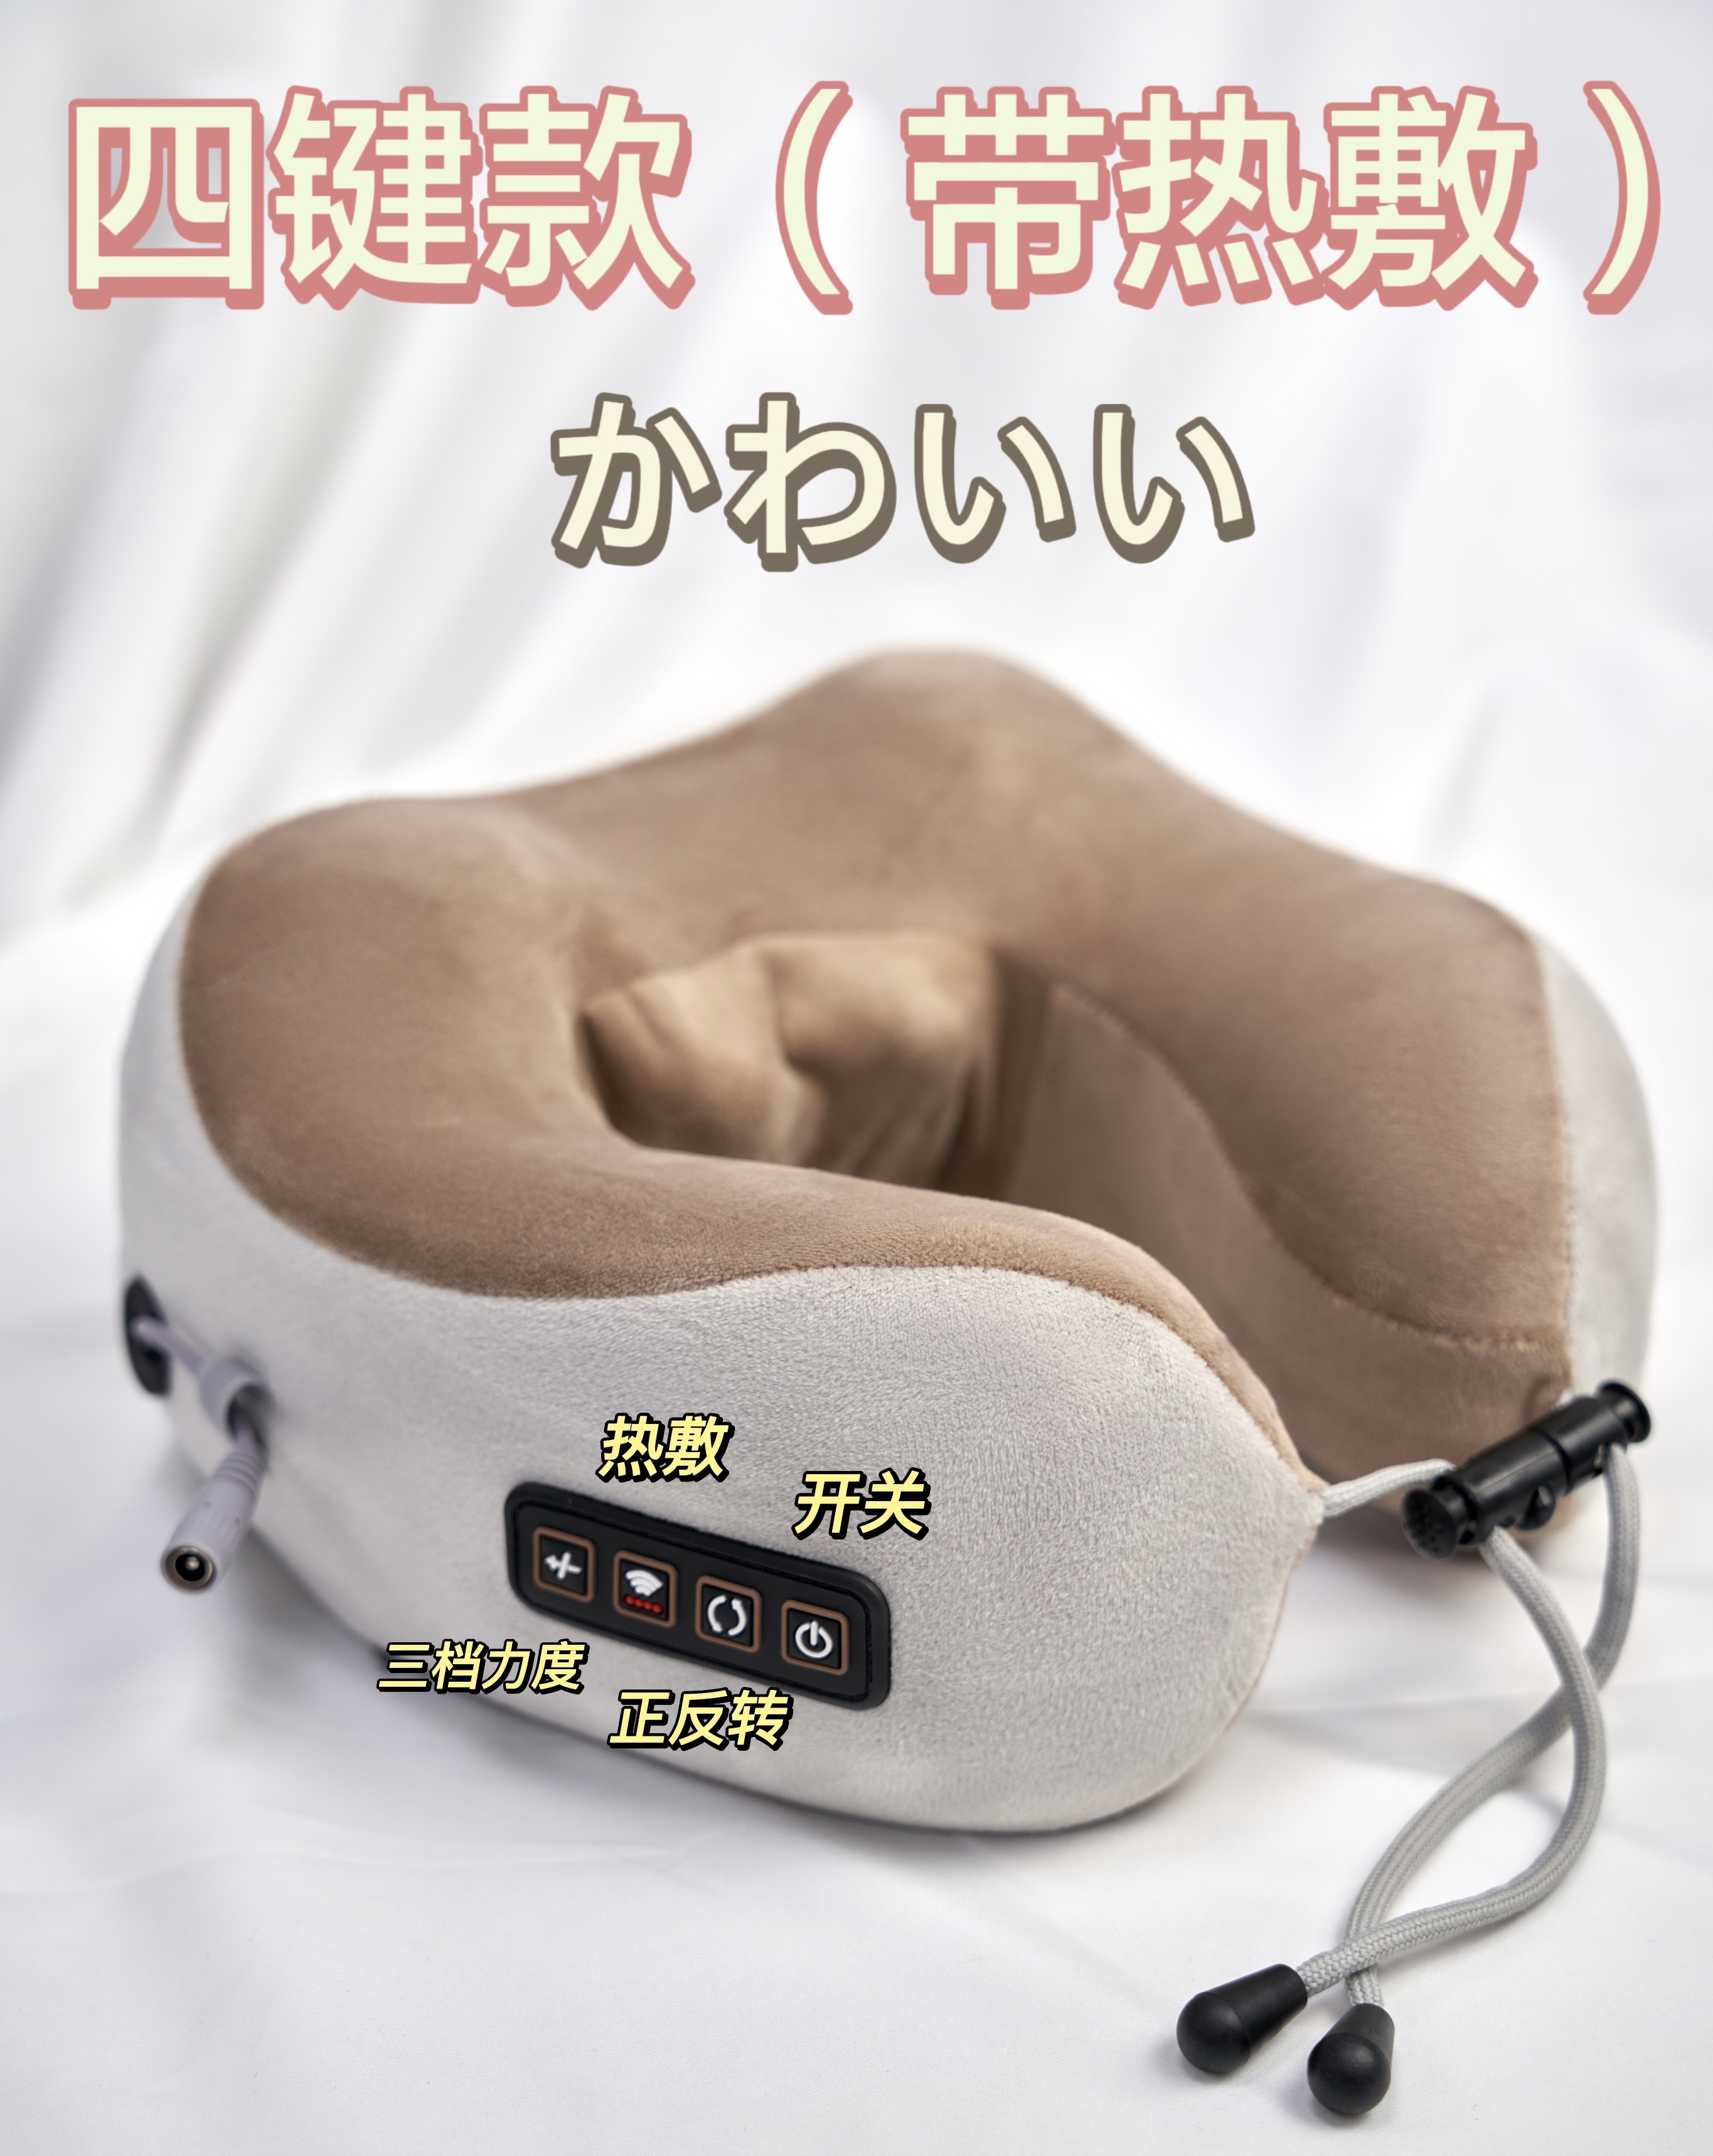 Sipland Cervical Spine Massage Instrument Simulation Man Massage Techniques 42 Degrees Constant Temperature Hot Compress Warranty A Year-Taobao